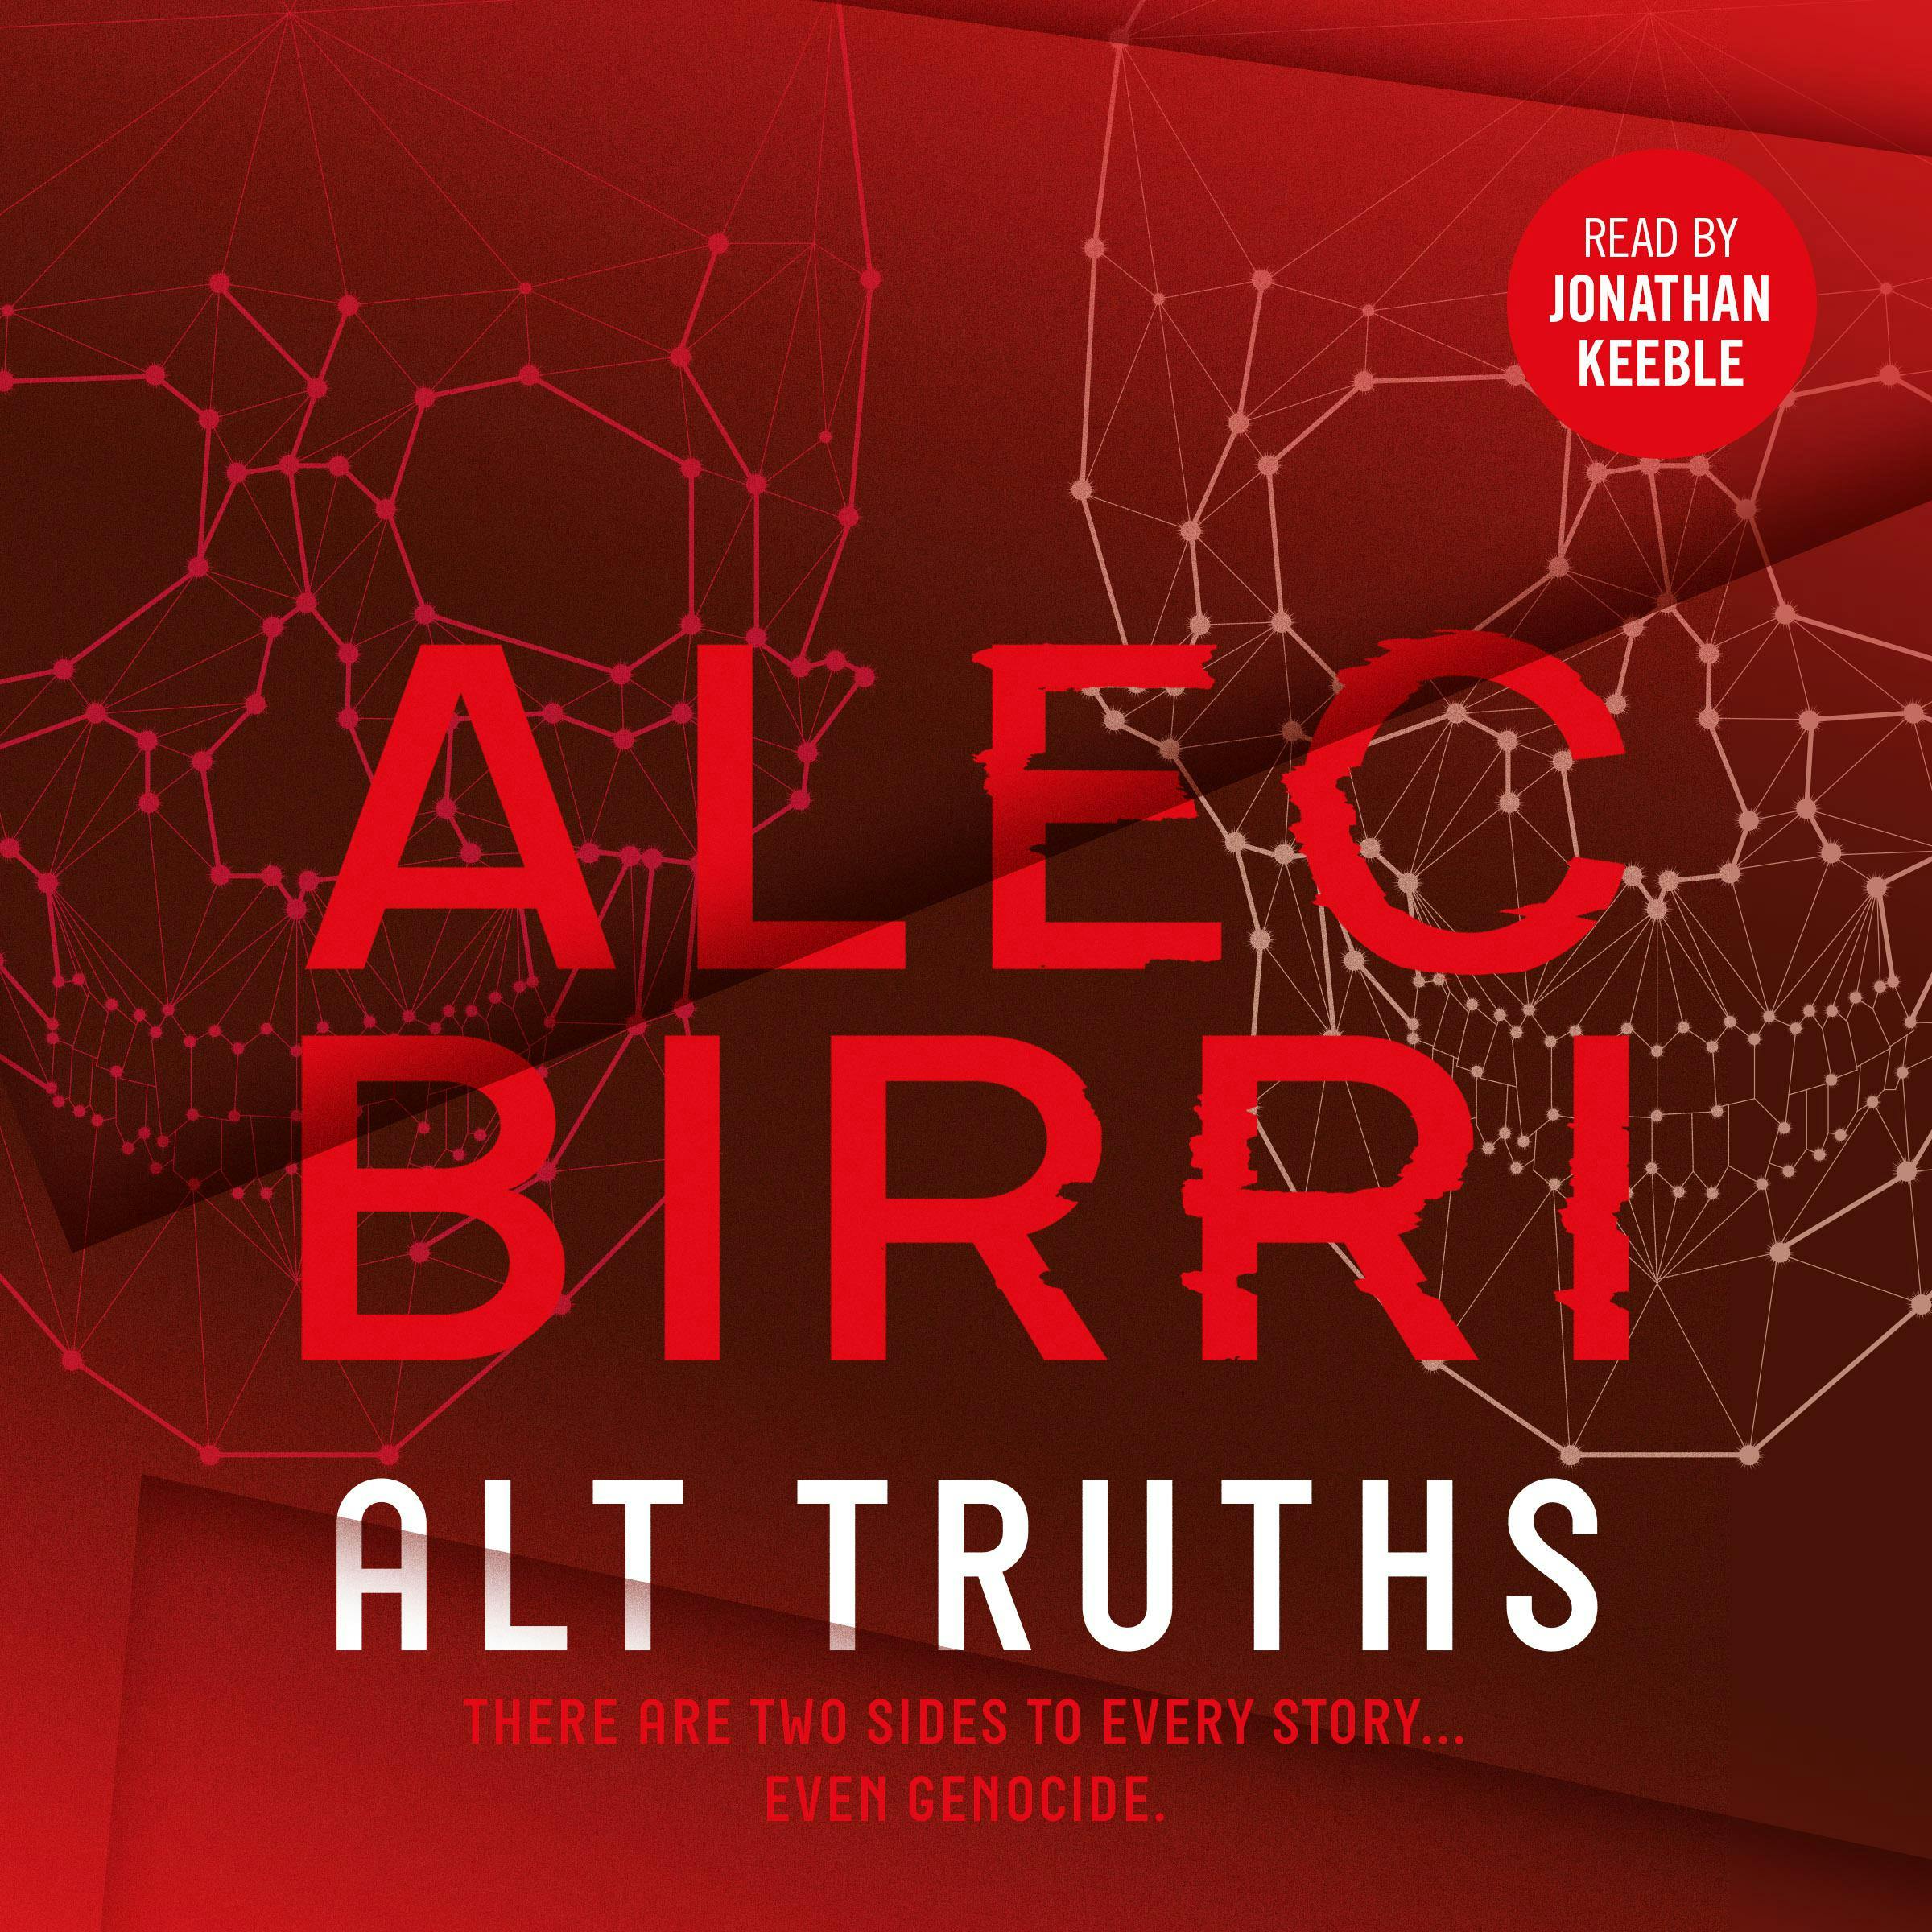 Alt Truths: There are two sides... - Alec Birri